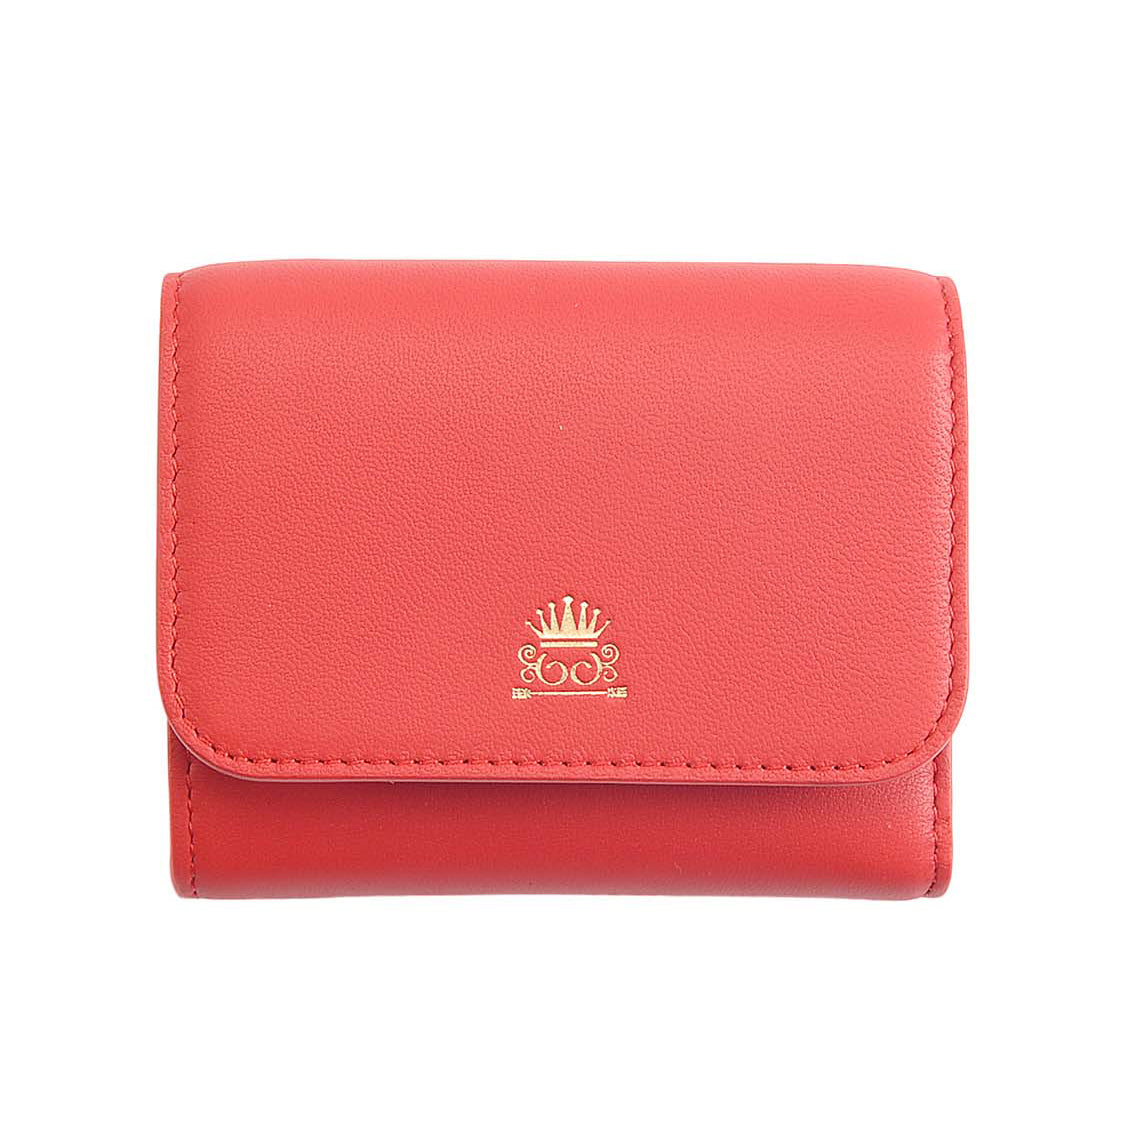 the-annabelle-small-wallet-